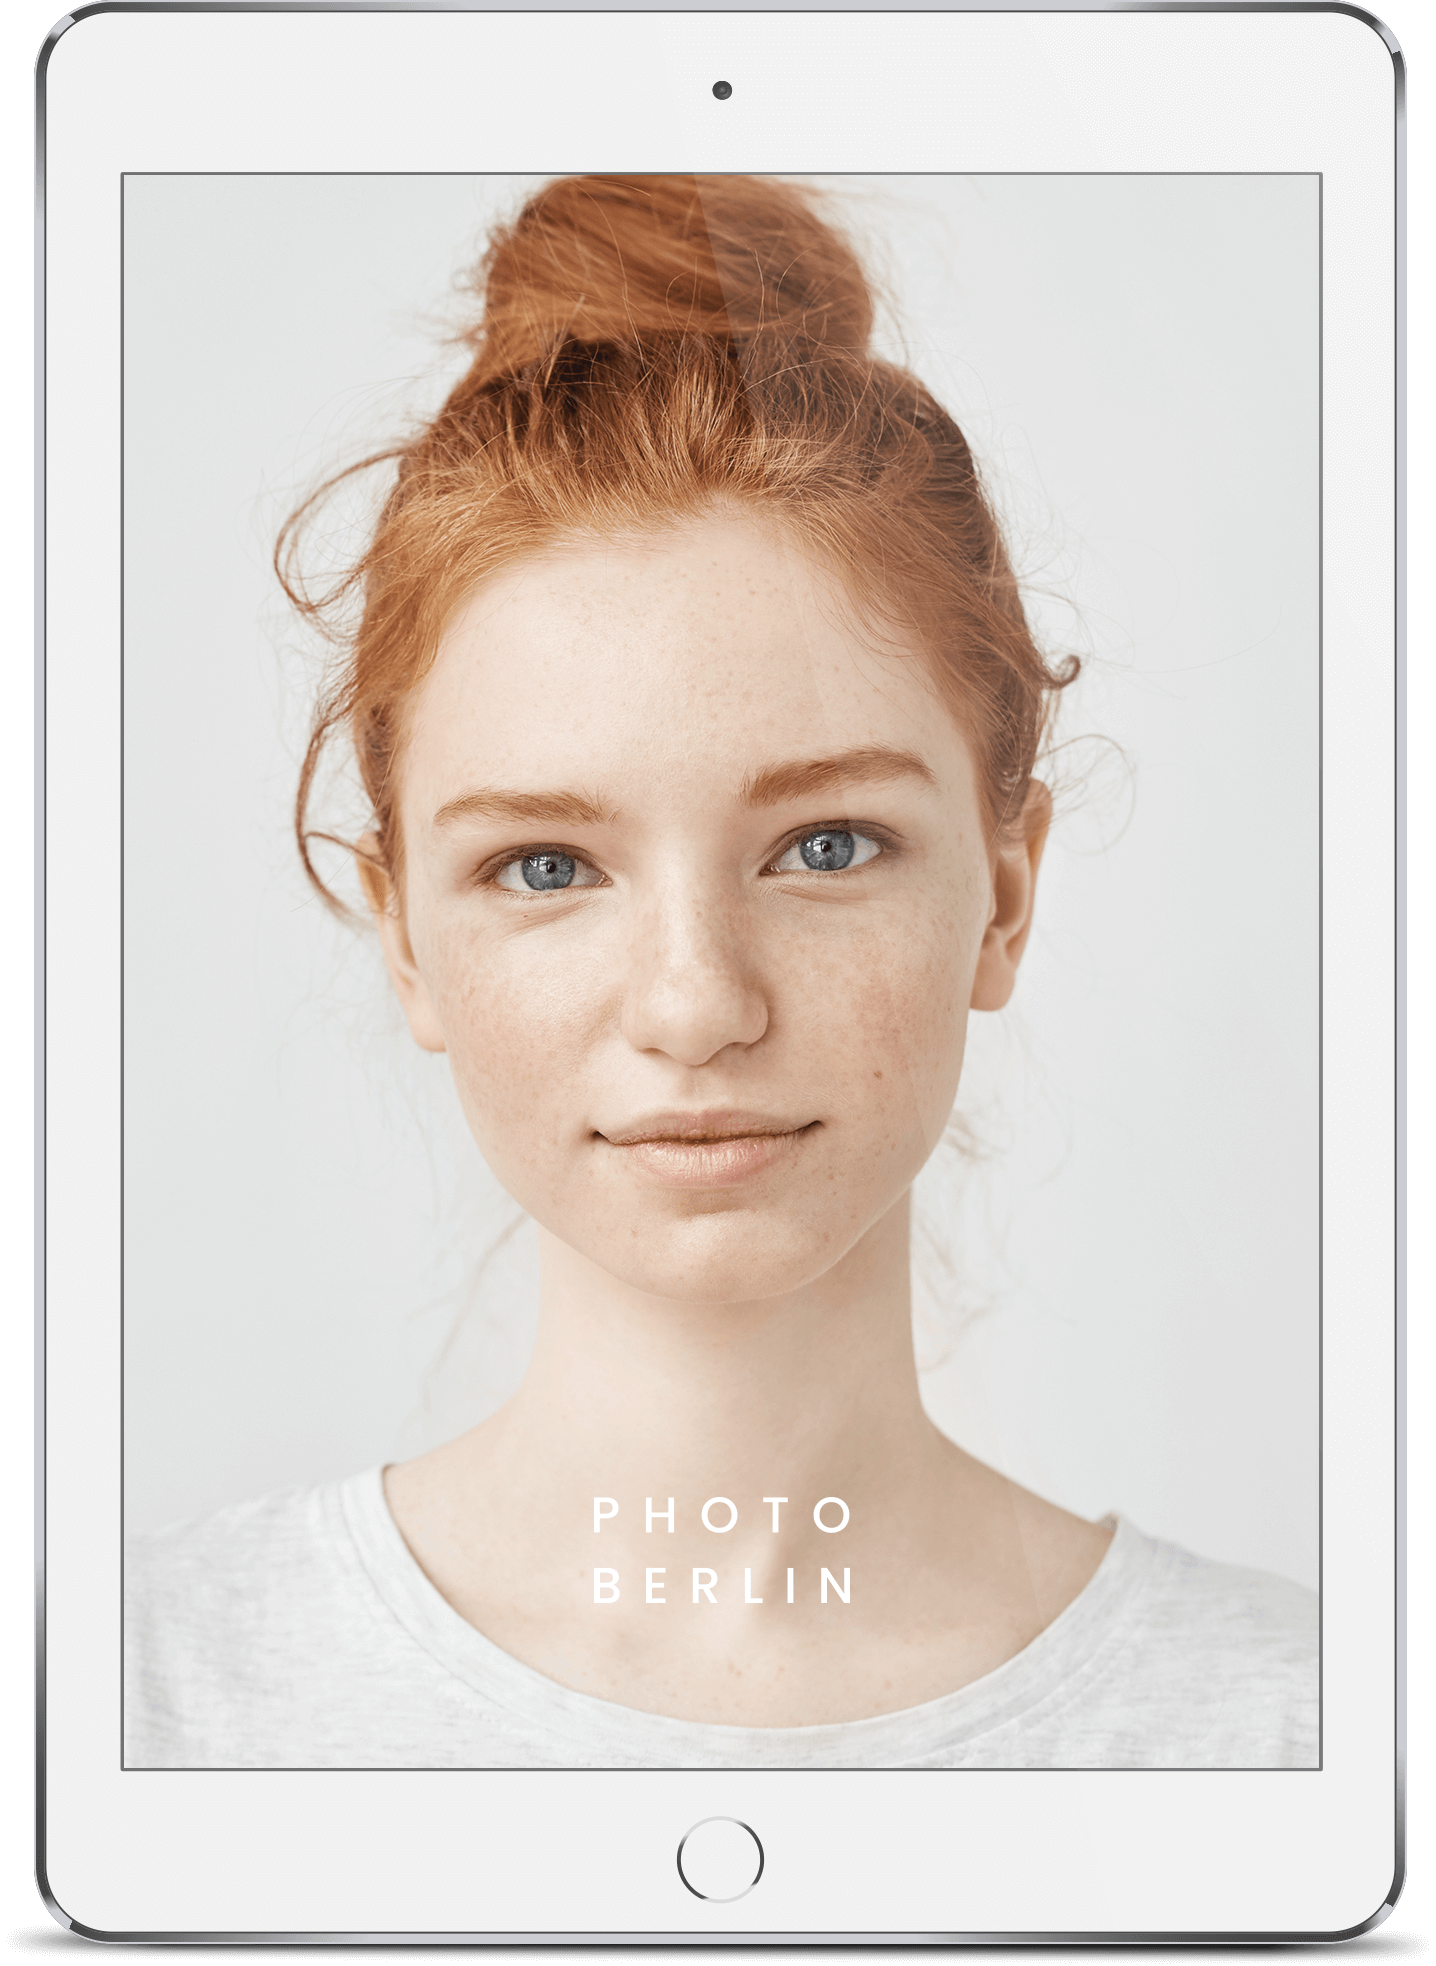 Hair crop with Adobe Photoshop &#8211; tutorial for portrait photographers